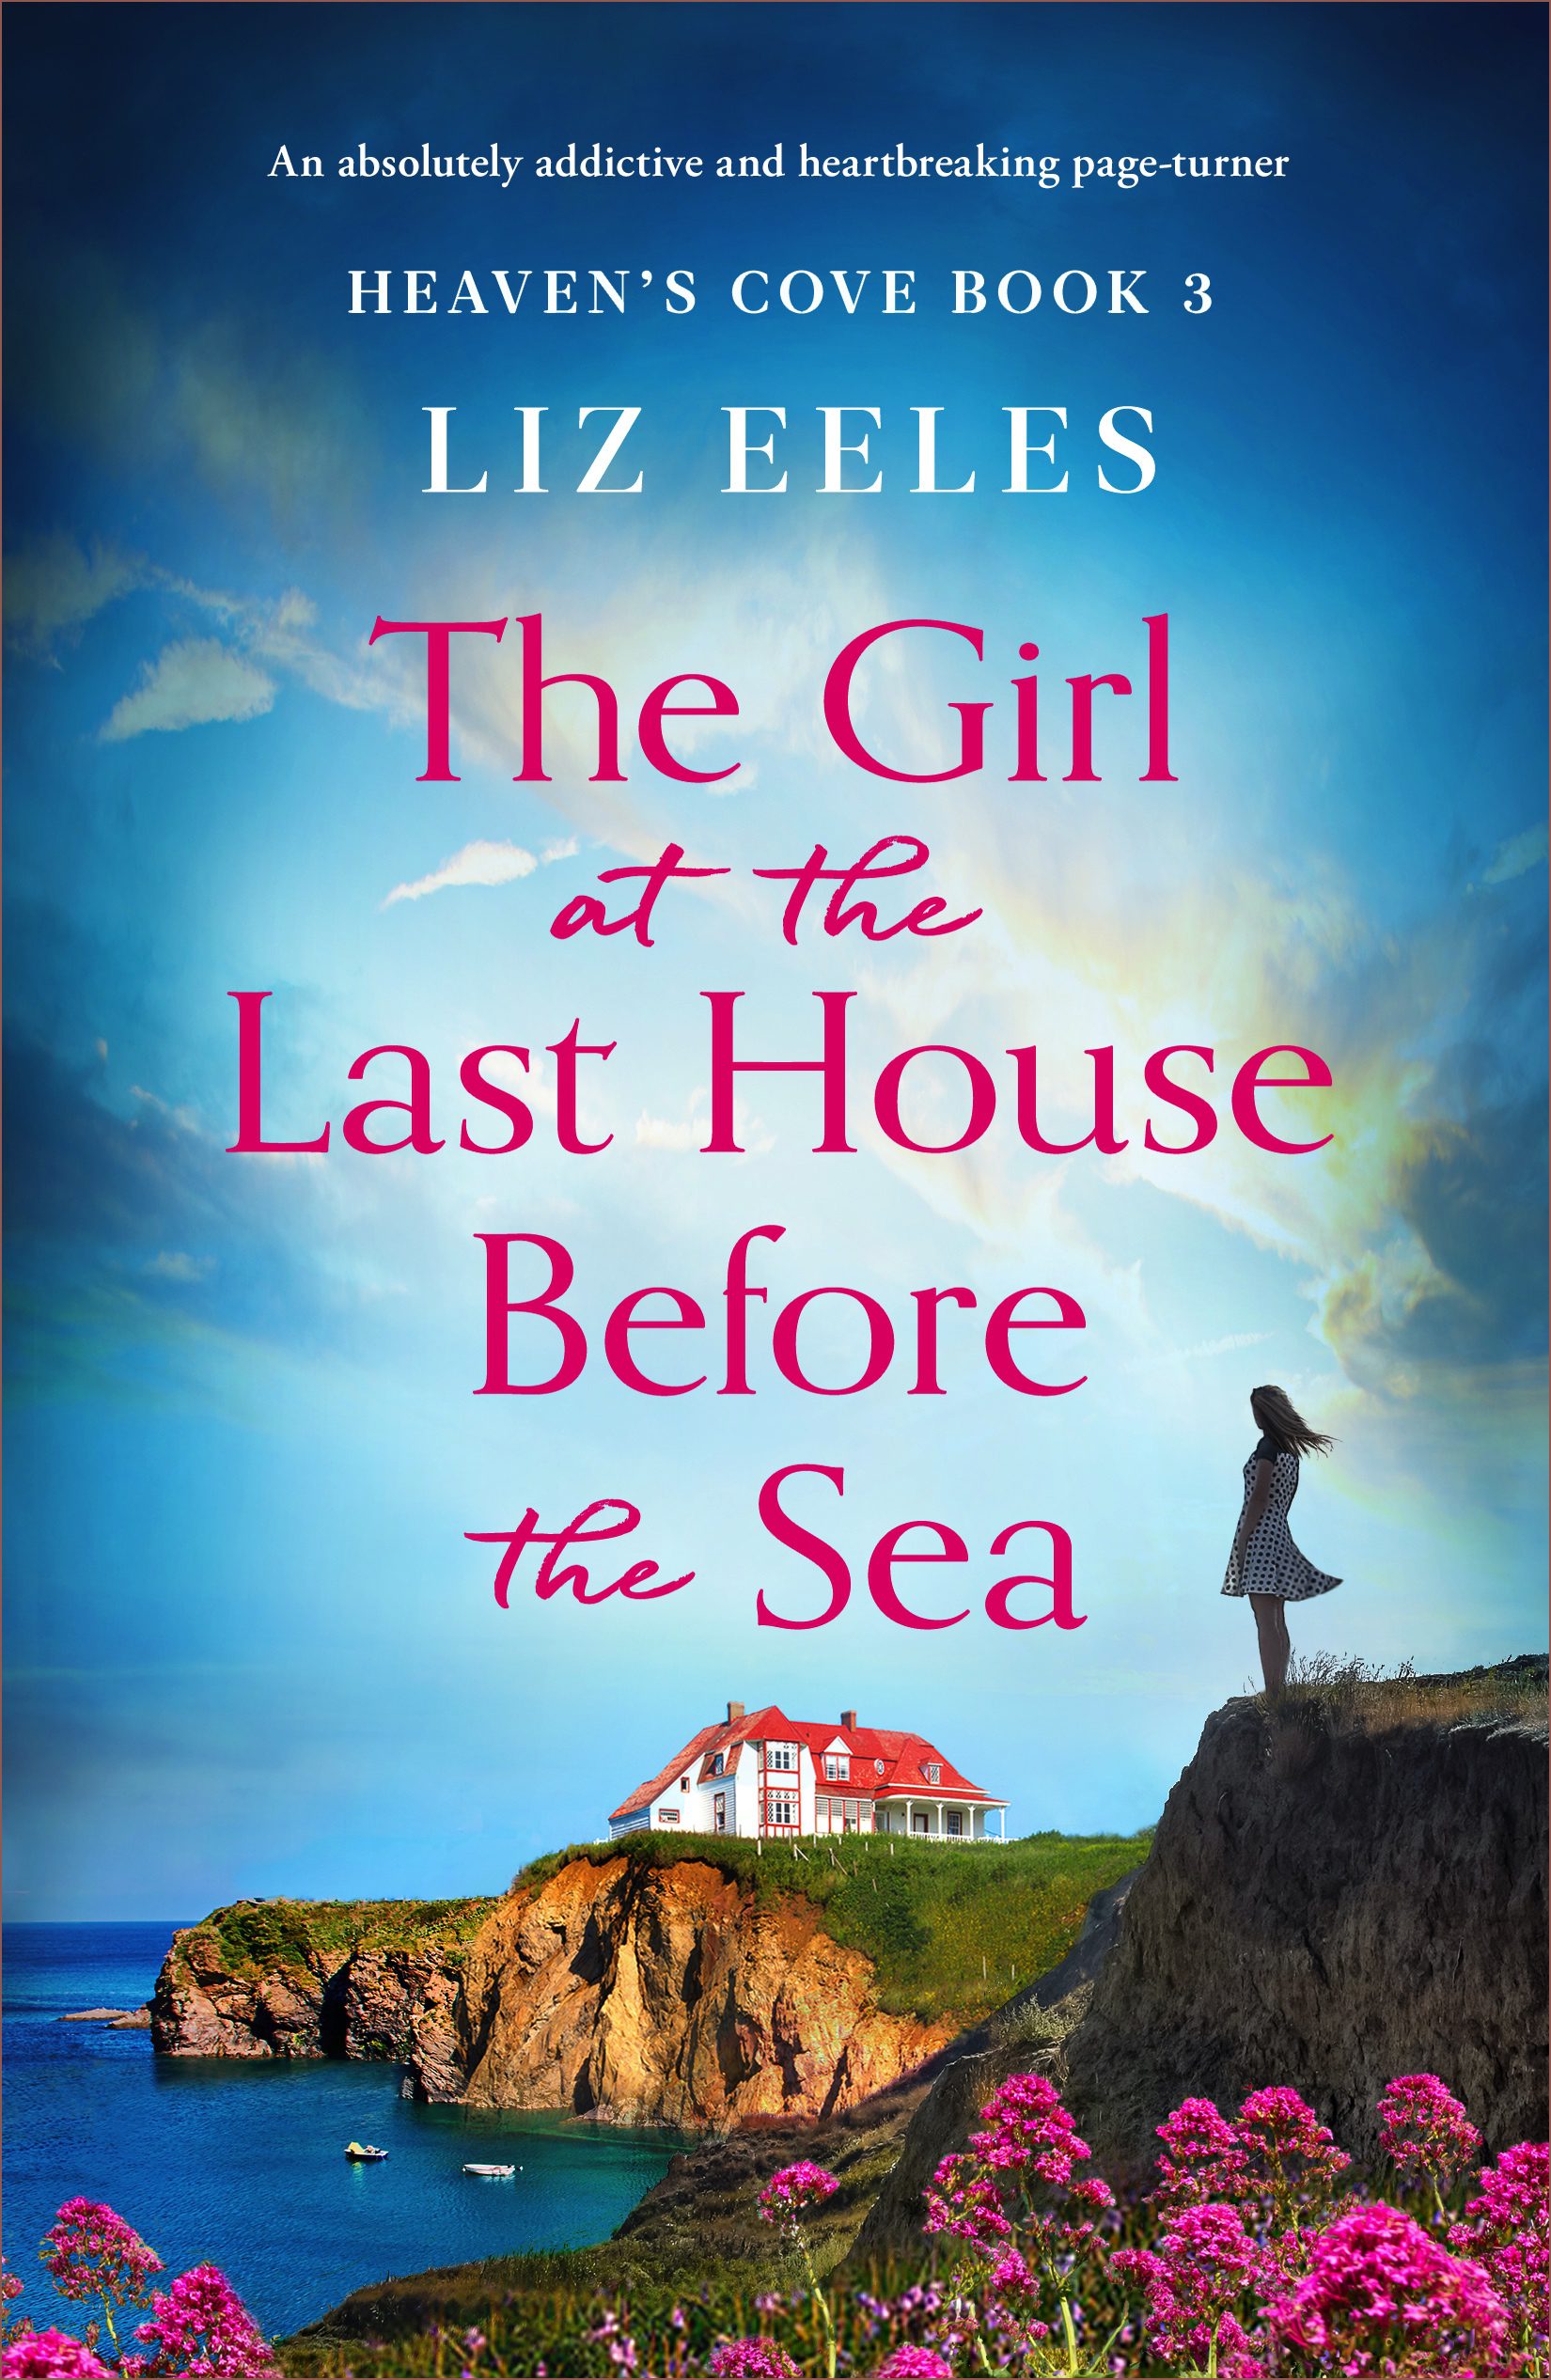 The Girl at the Last House Before the Sea book cover